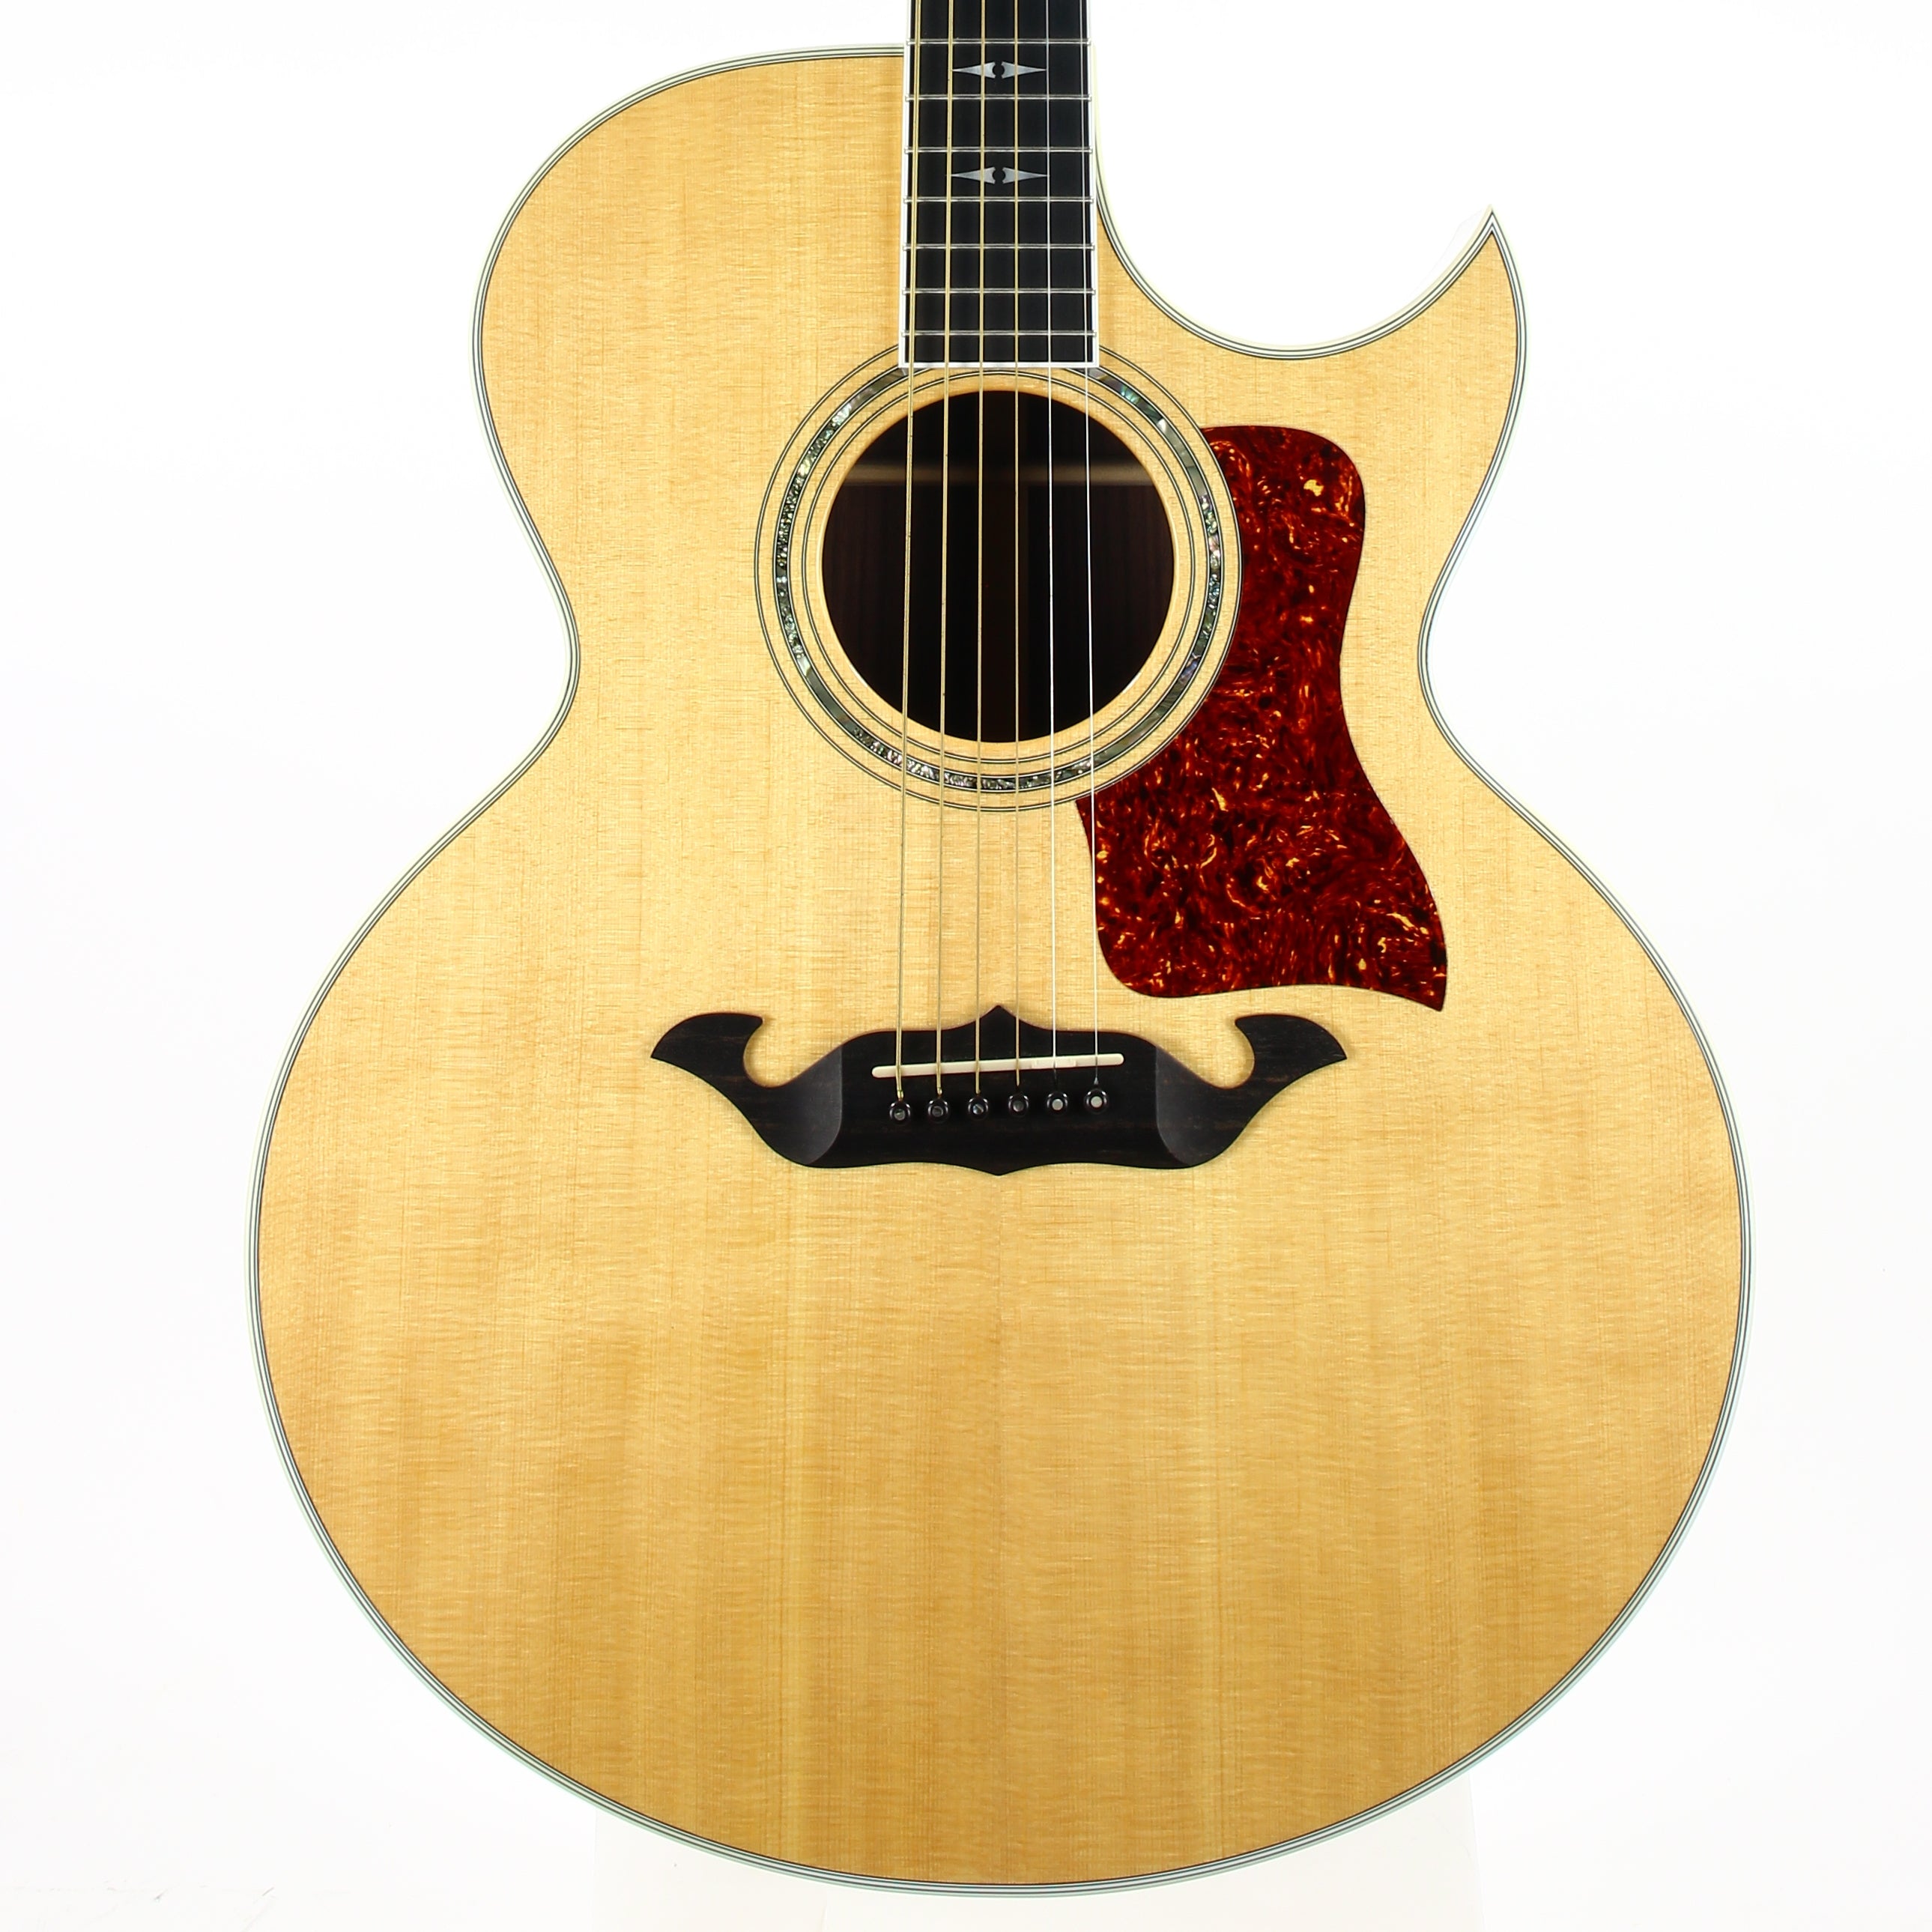 *SOLD*  UNPLAYED! 1994 Taylor 815C Jumbo Acoustic Guitar - Florentine Cutaway, 800 series 810 812 814ce 815ce